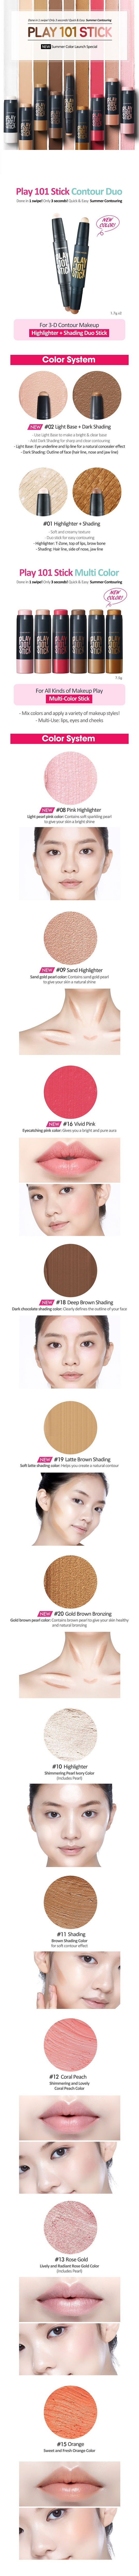 [Etude house] Play 101 Stick Multi Color 7.5g #10 Highlighter